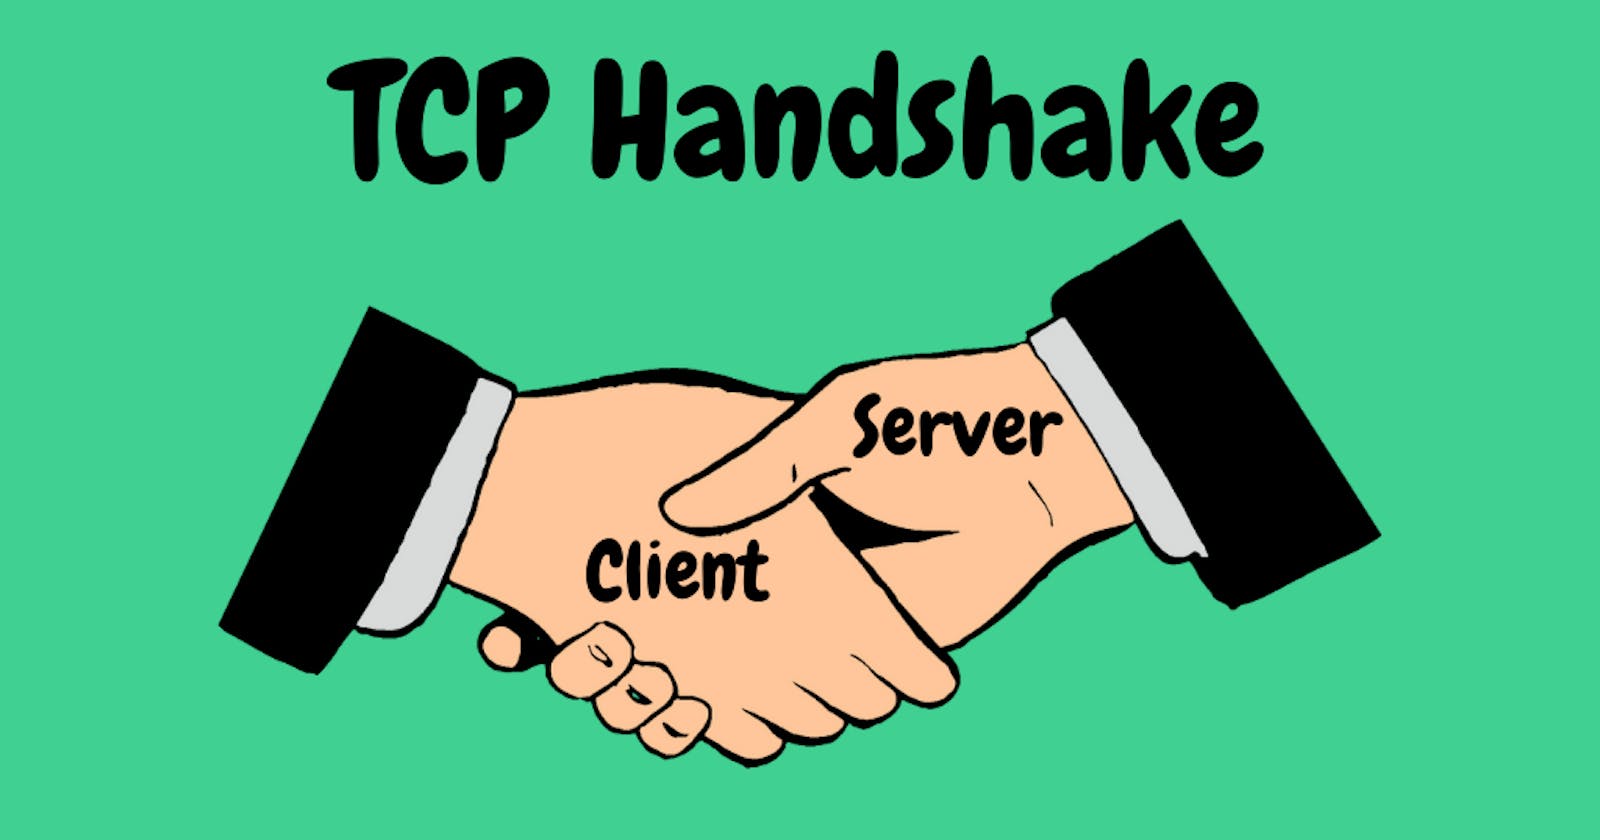 How does a TCP 3-way handshake work?